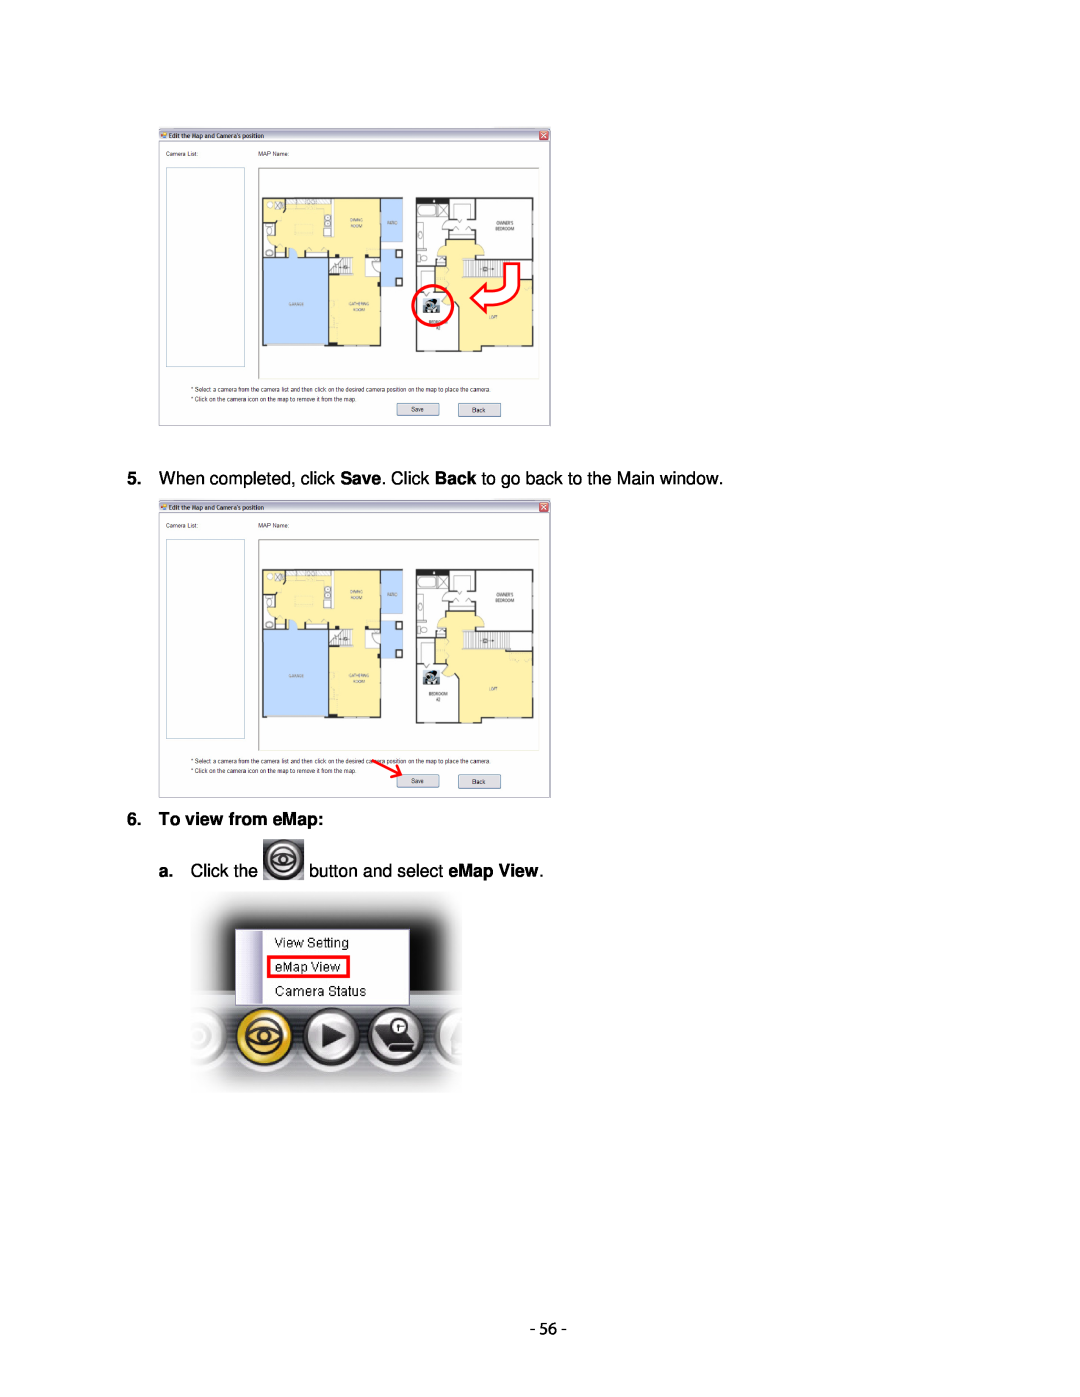 Airlink101 AICN1747W user manual To view from eMap, a. Click the button and select eMap View 